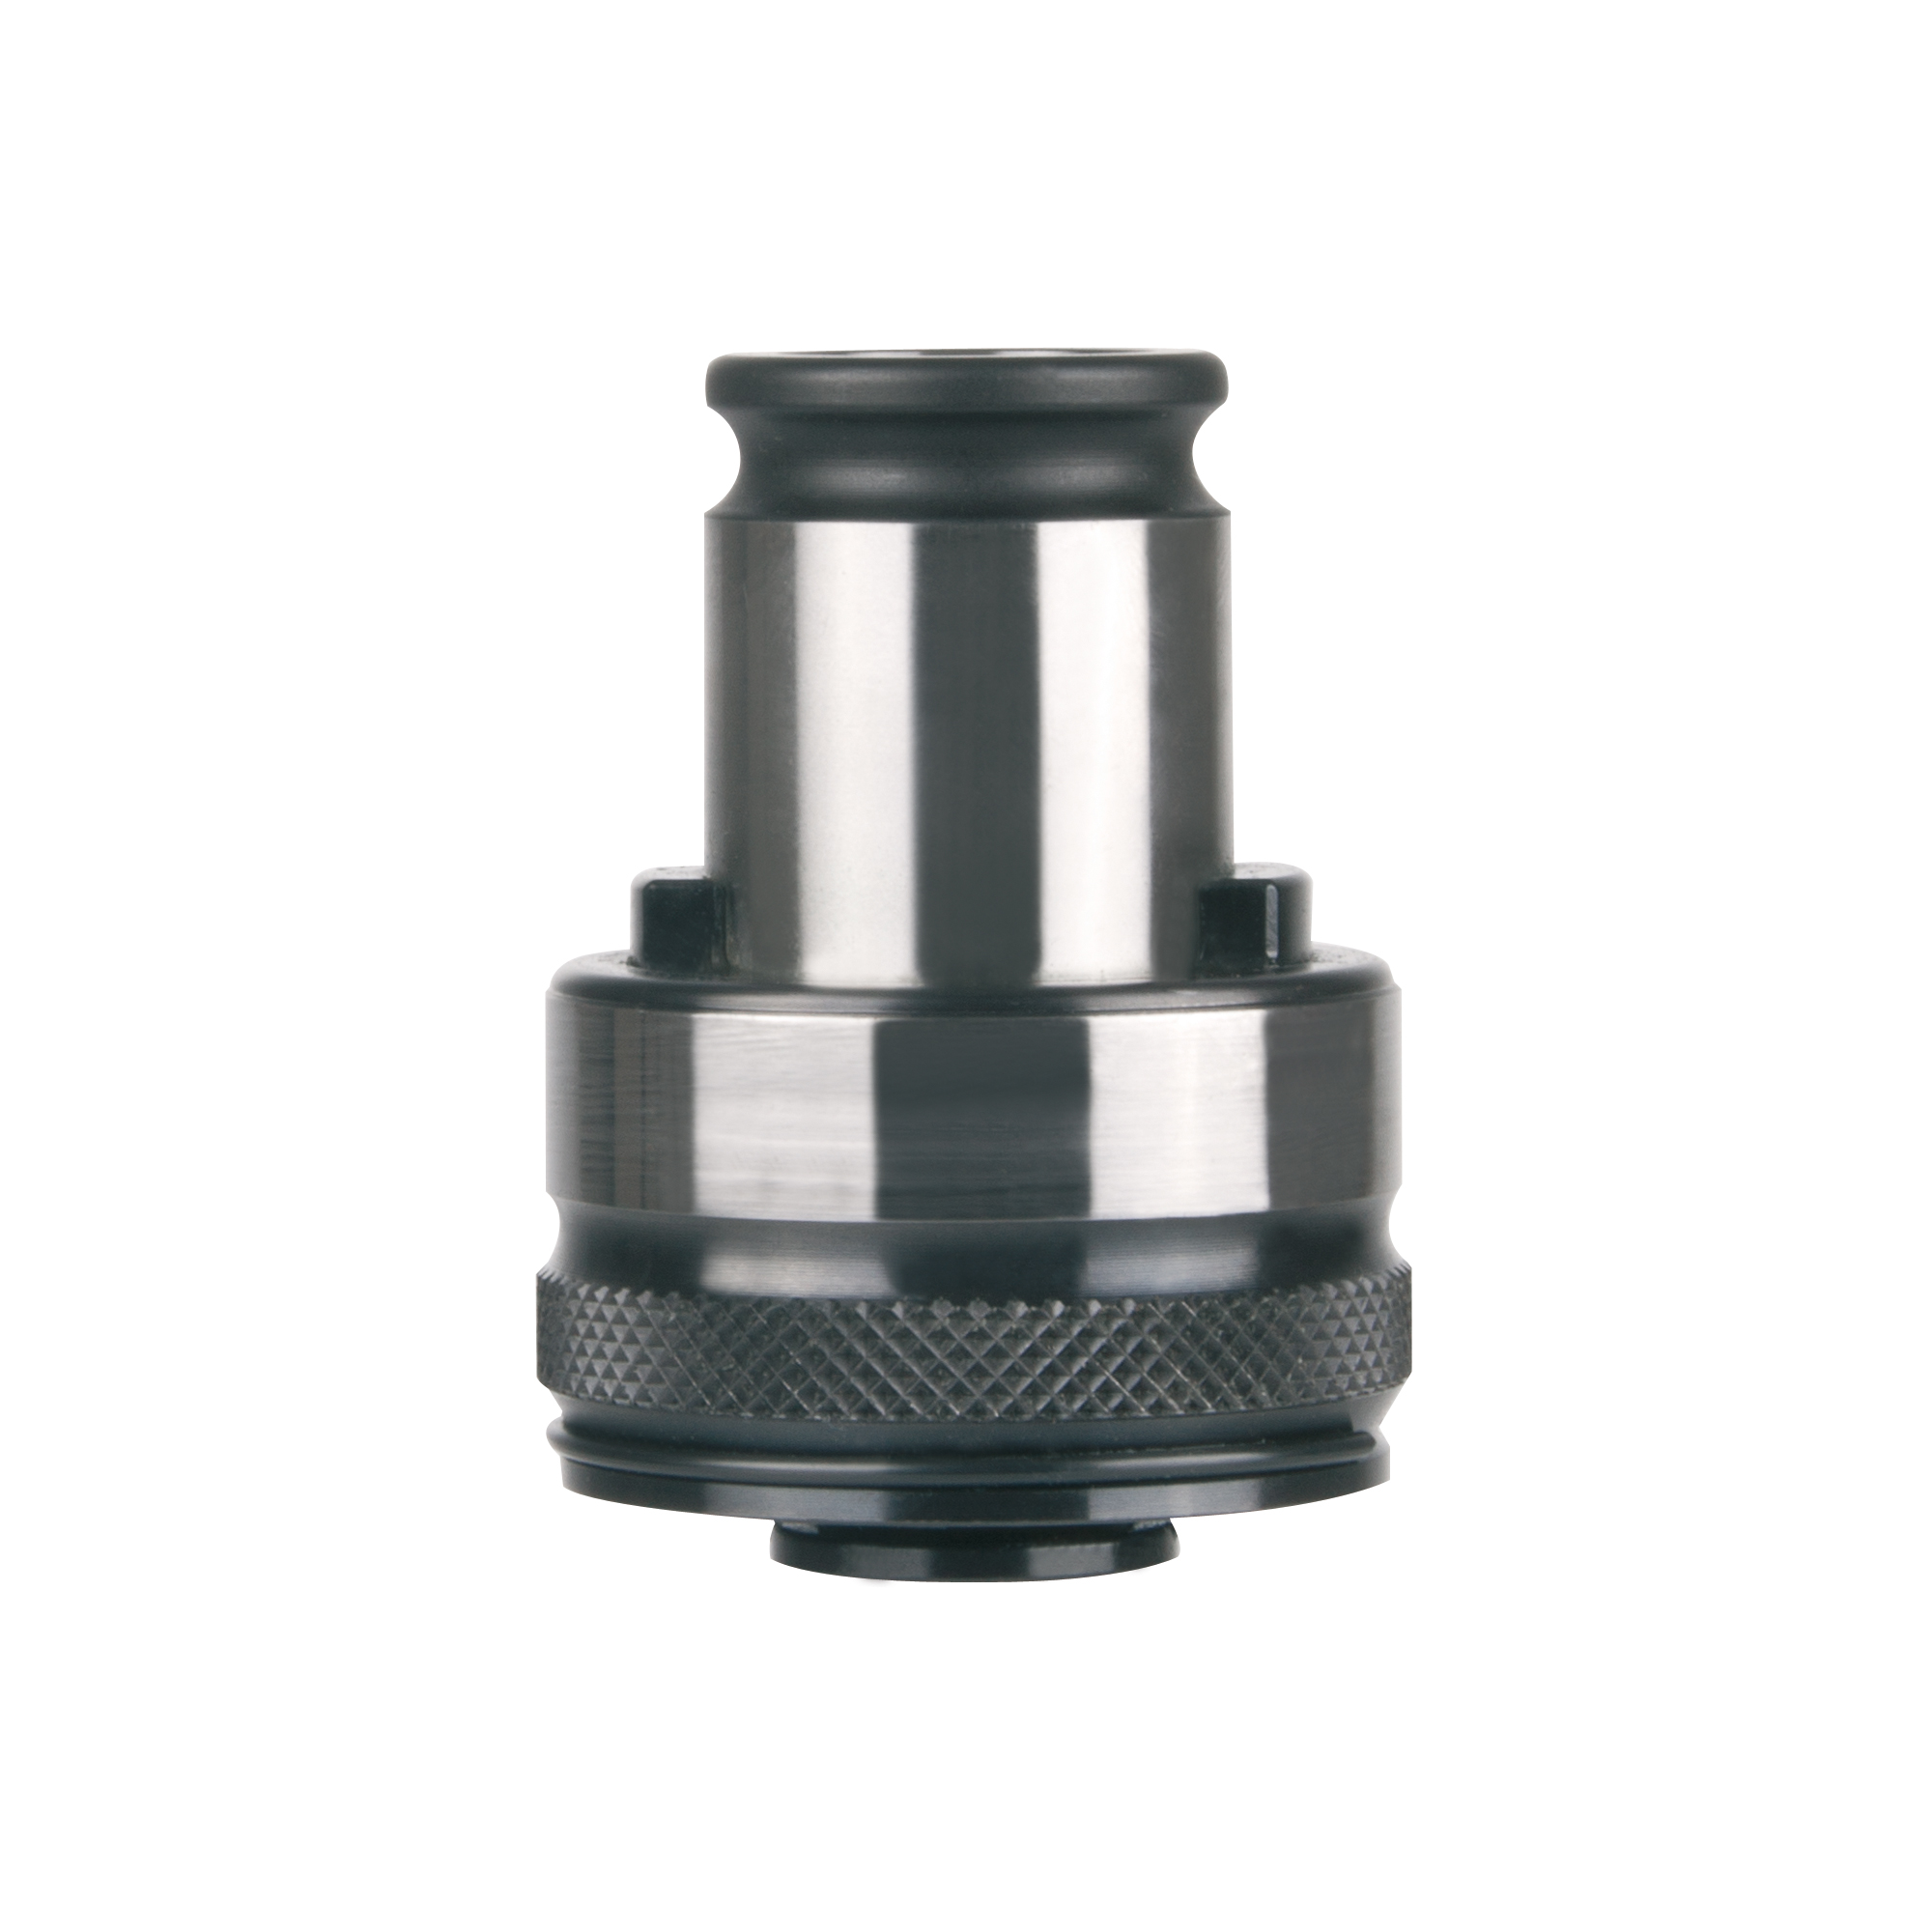 Ruko 11mm Quick-change insert with safety coupling